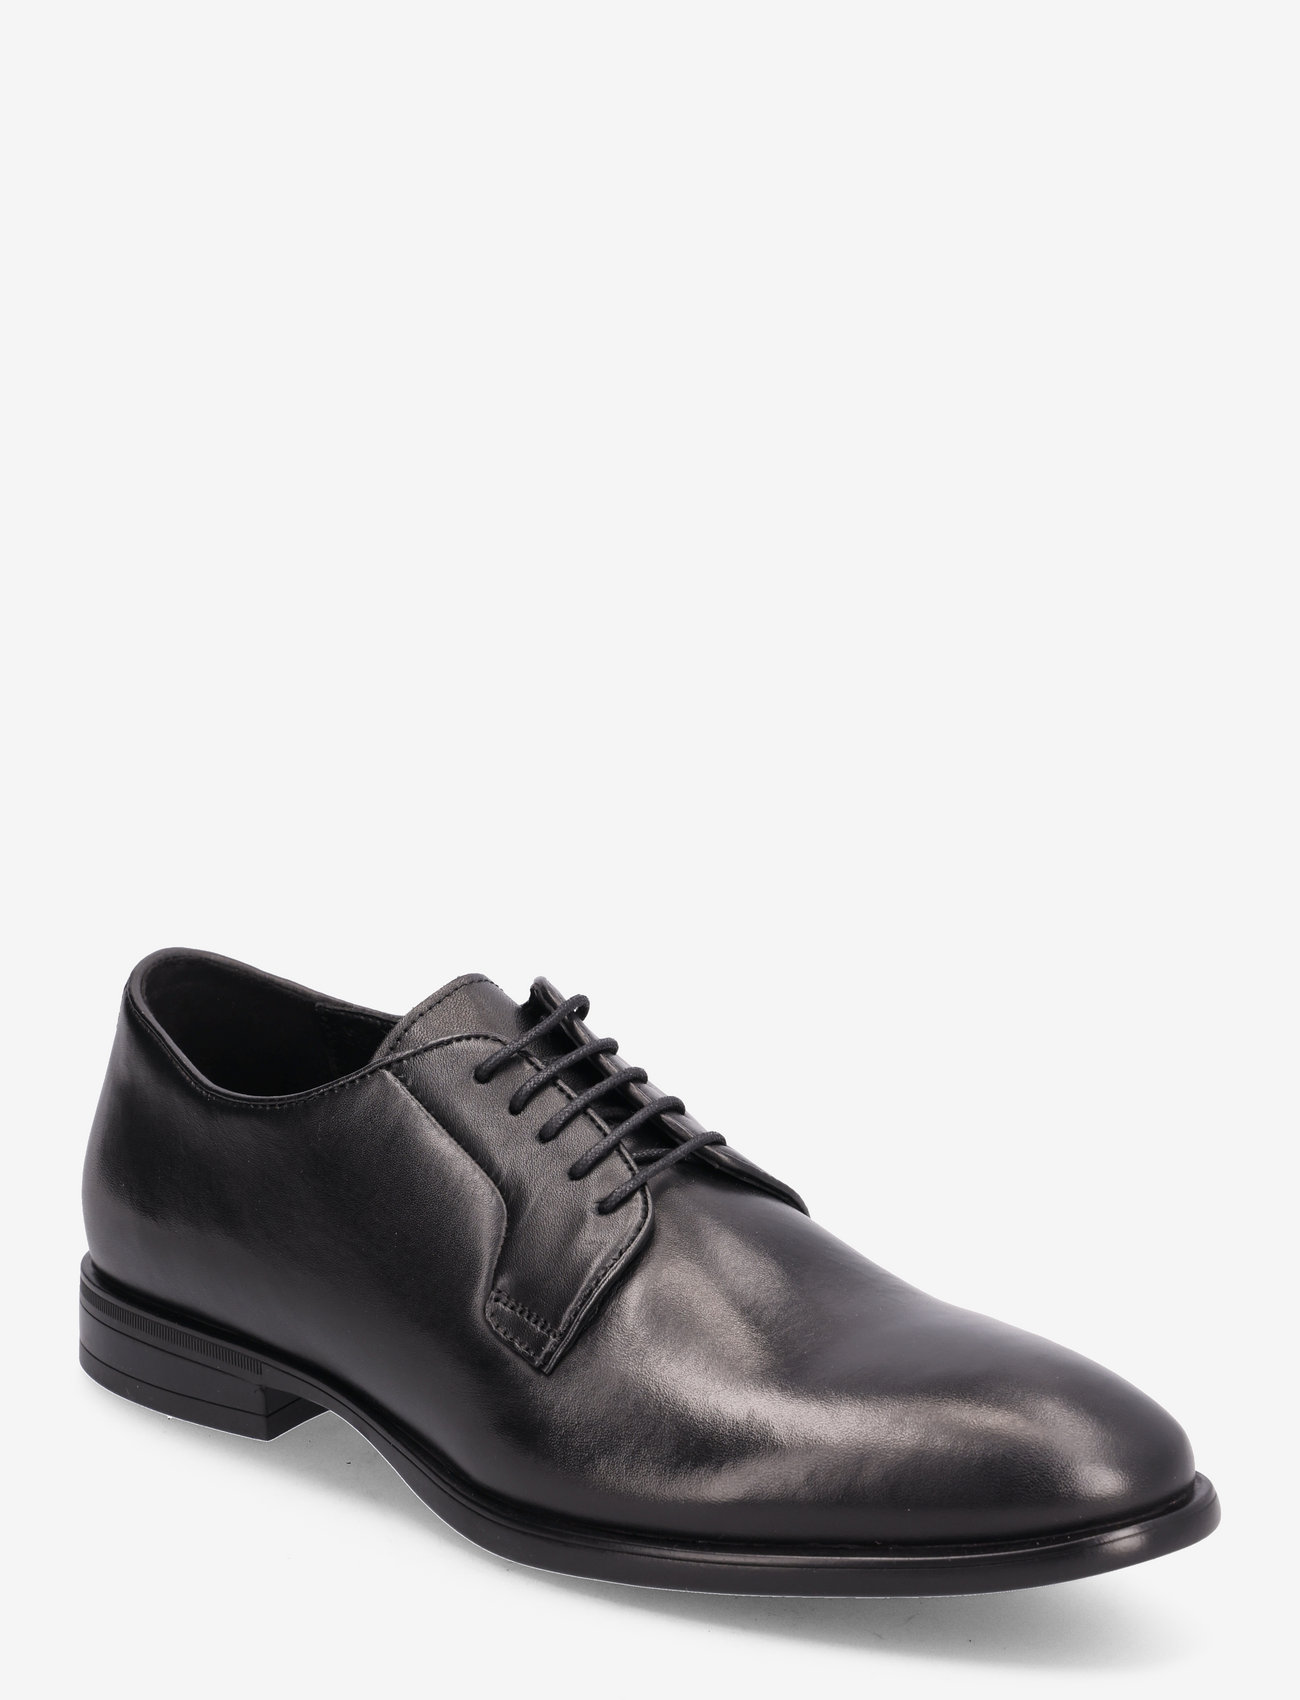 Marstrand - MURPHY DERBY MARSTRAND - laced shoes - black - 0